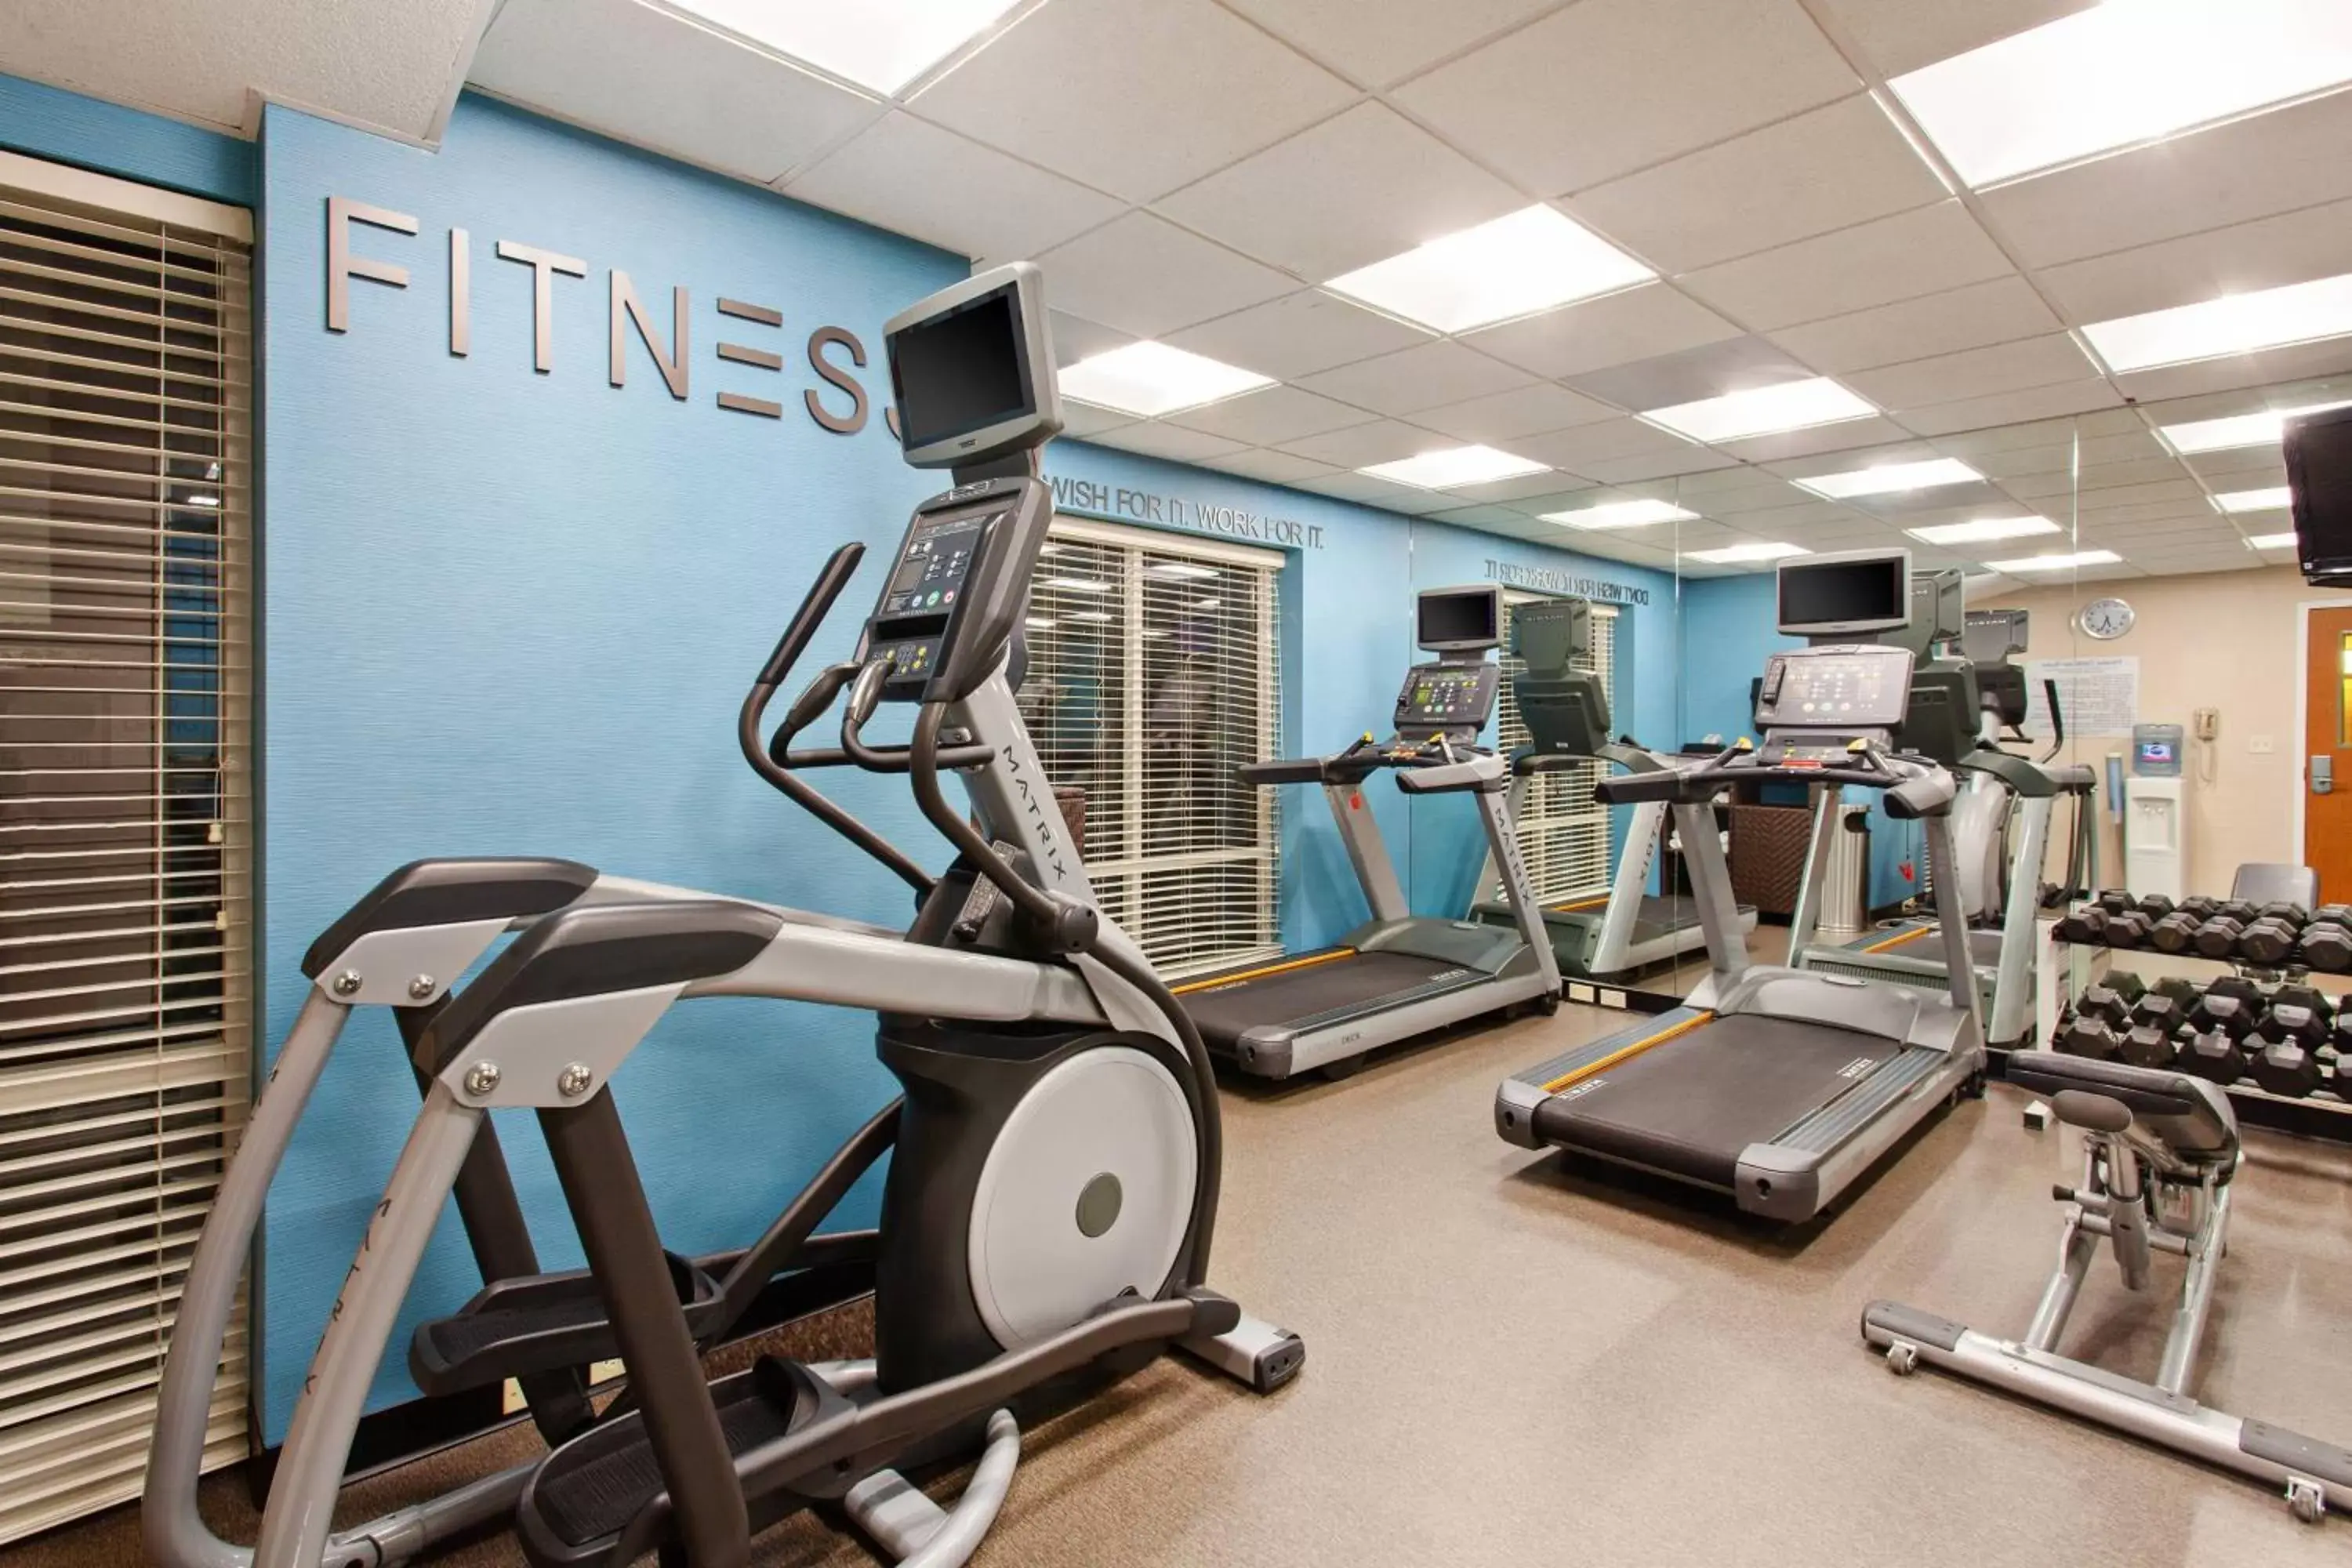 Fitness centre/facilities, Fitness Center/Facilities in Fairfield Inn & Suites - Los Angeles West Covina